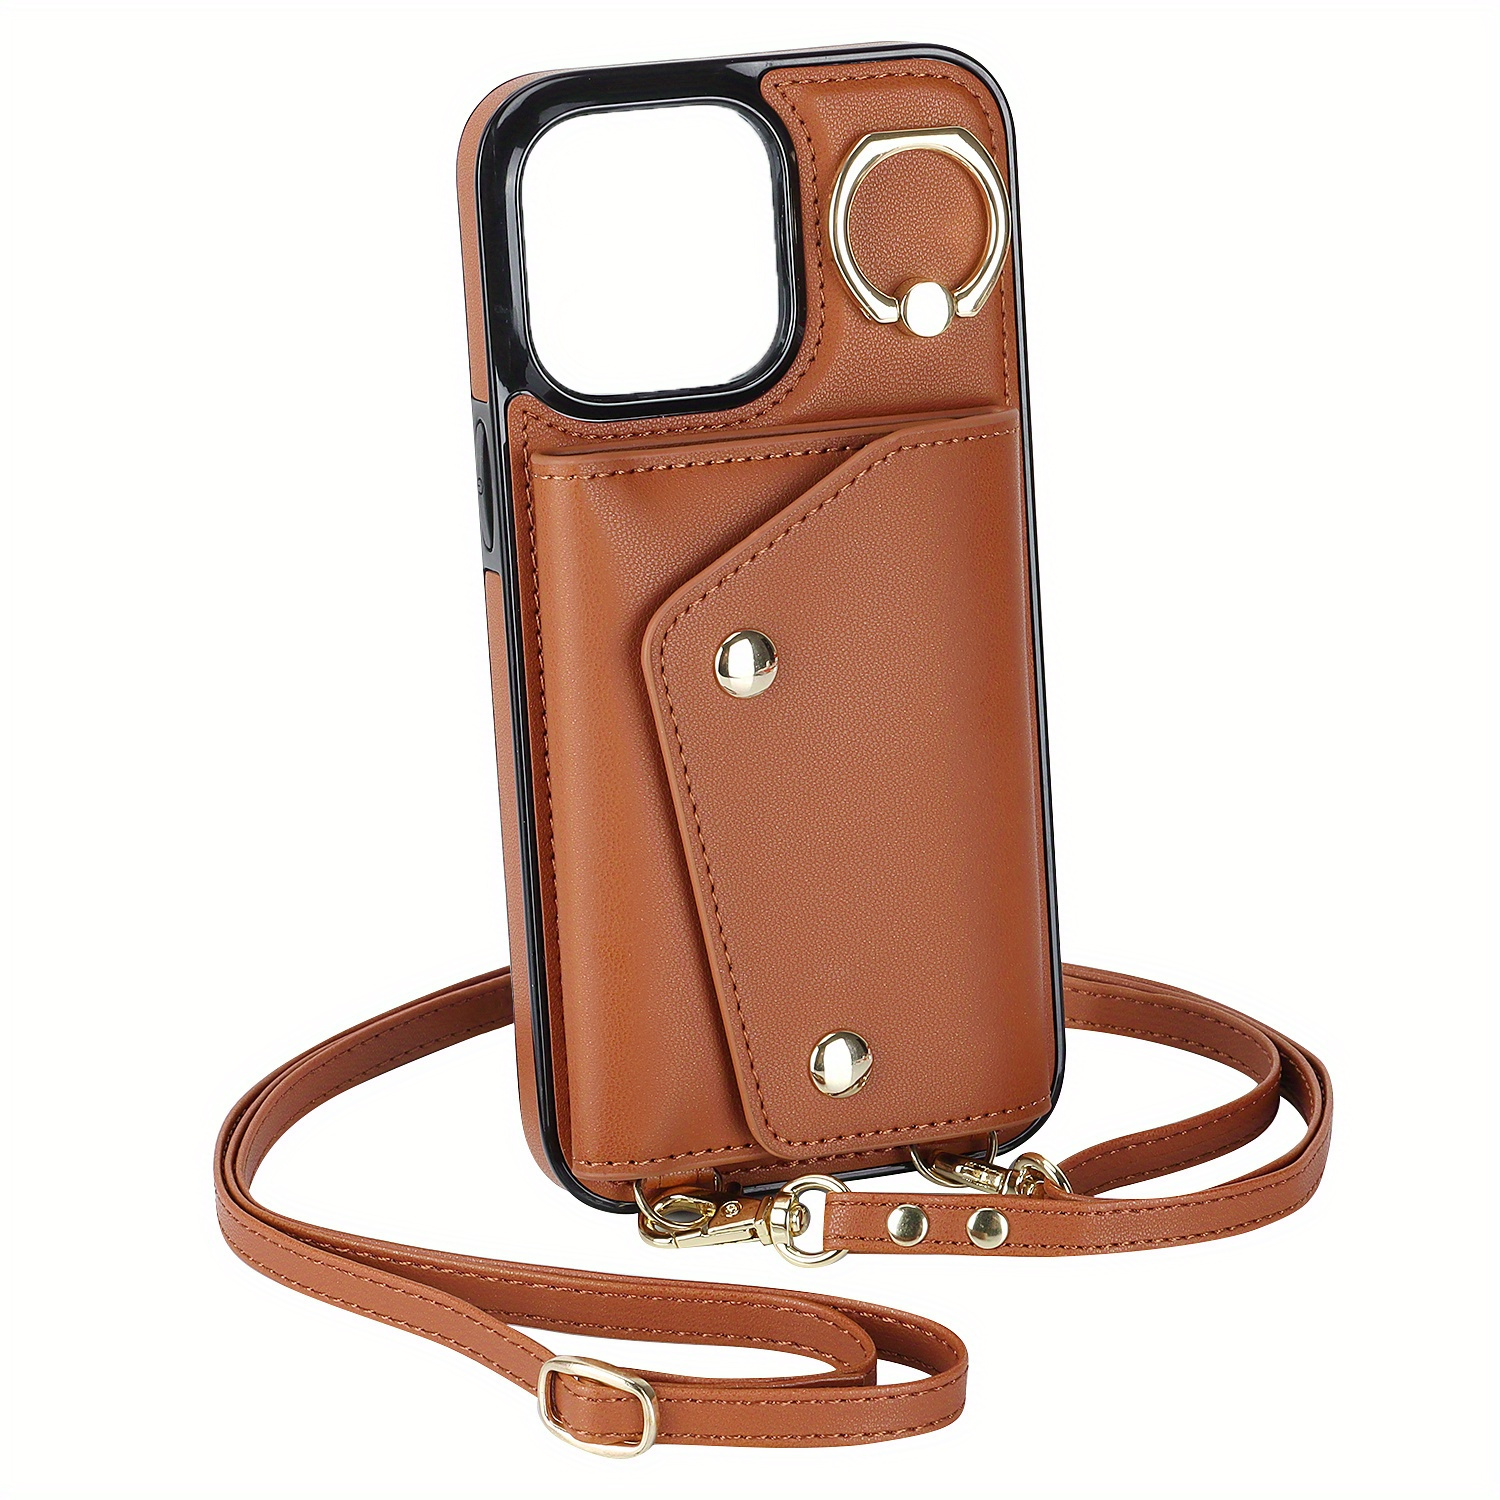 Fashion PU Leather Cute Phone Cases For iPhone 14 13 12 11 Pro Max